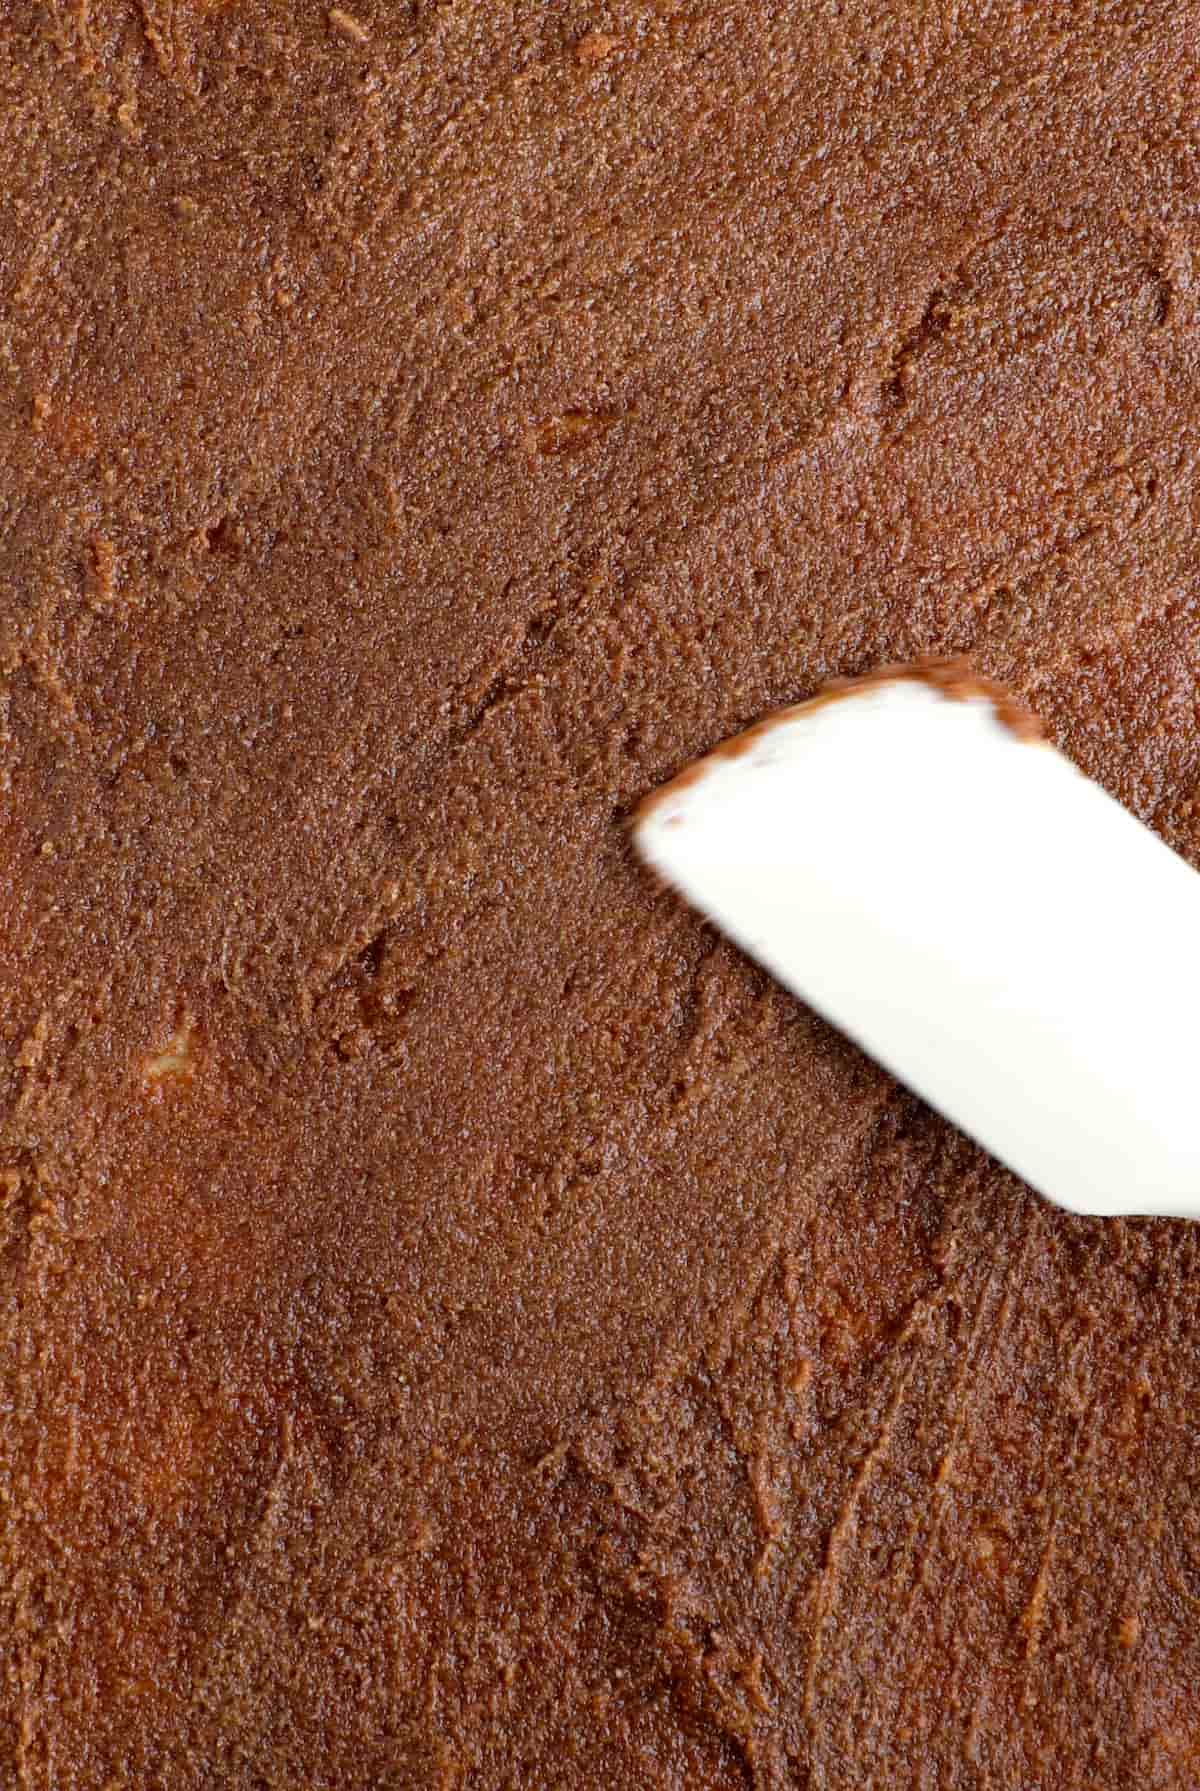 A silicone spatula spreading the filling on the cinnamon roll dough that's been rolled out.